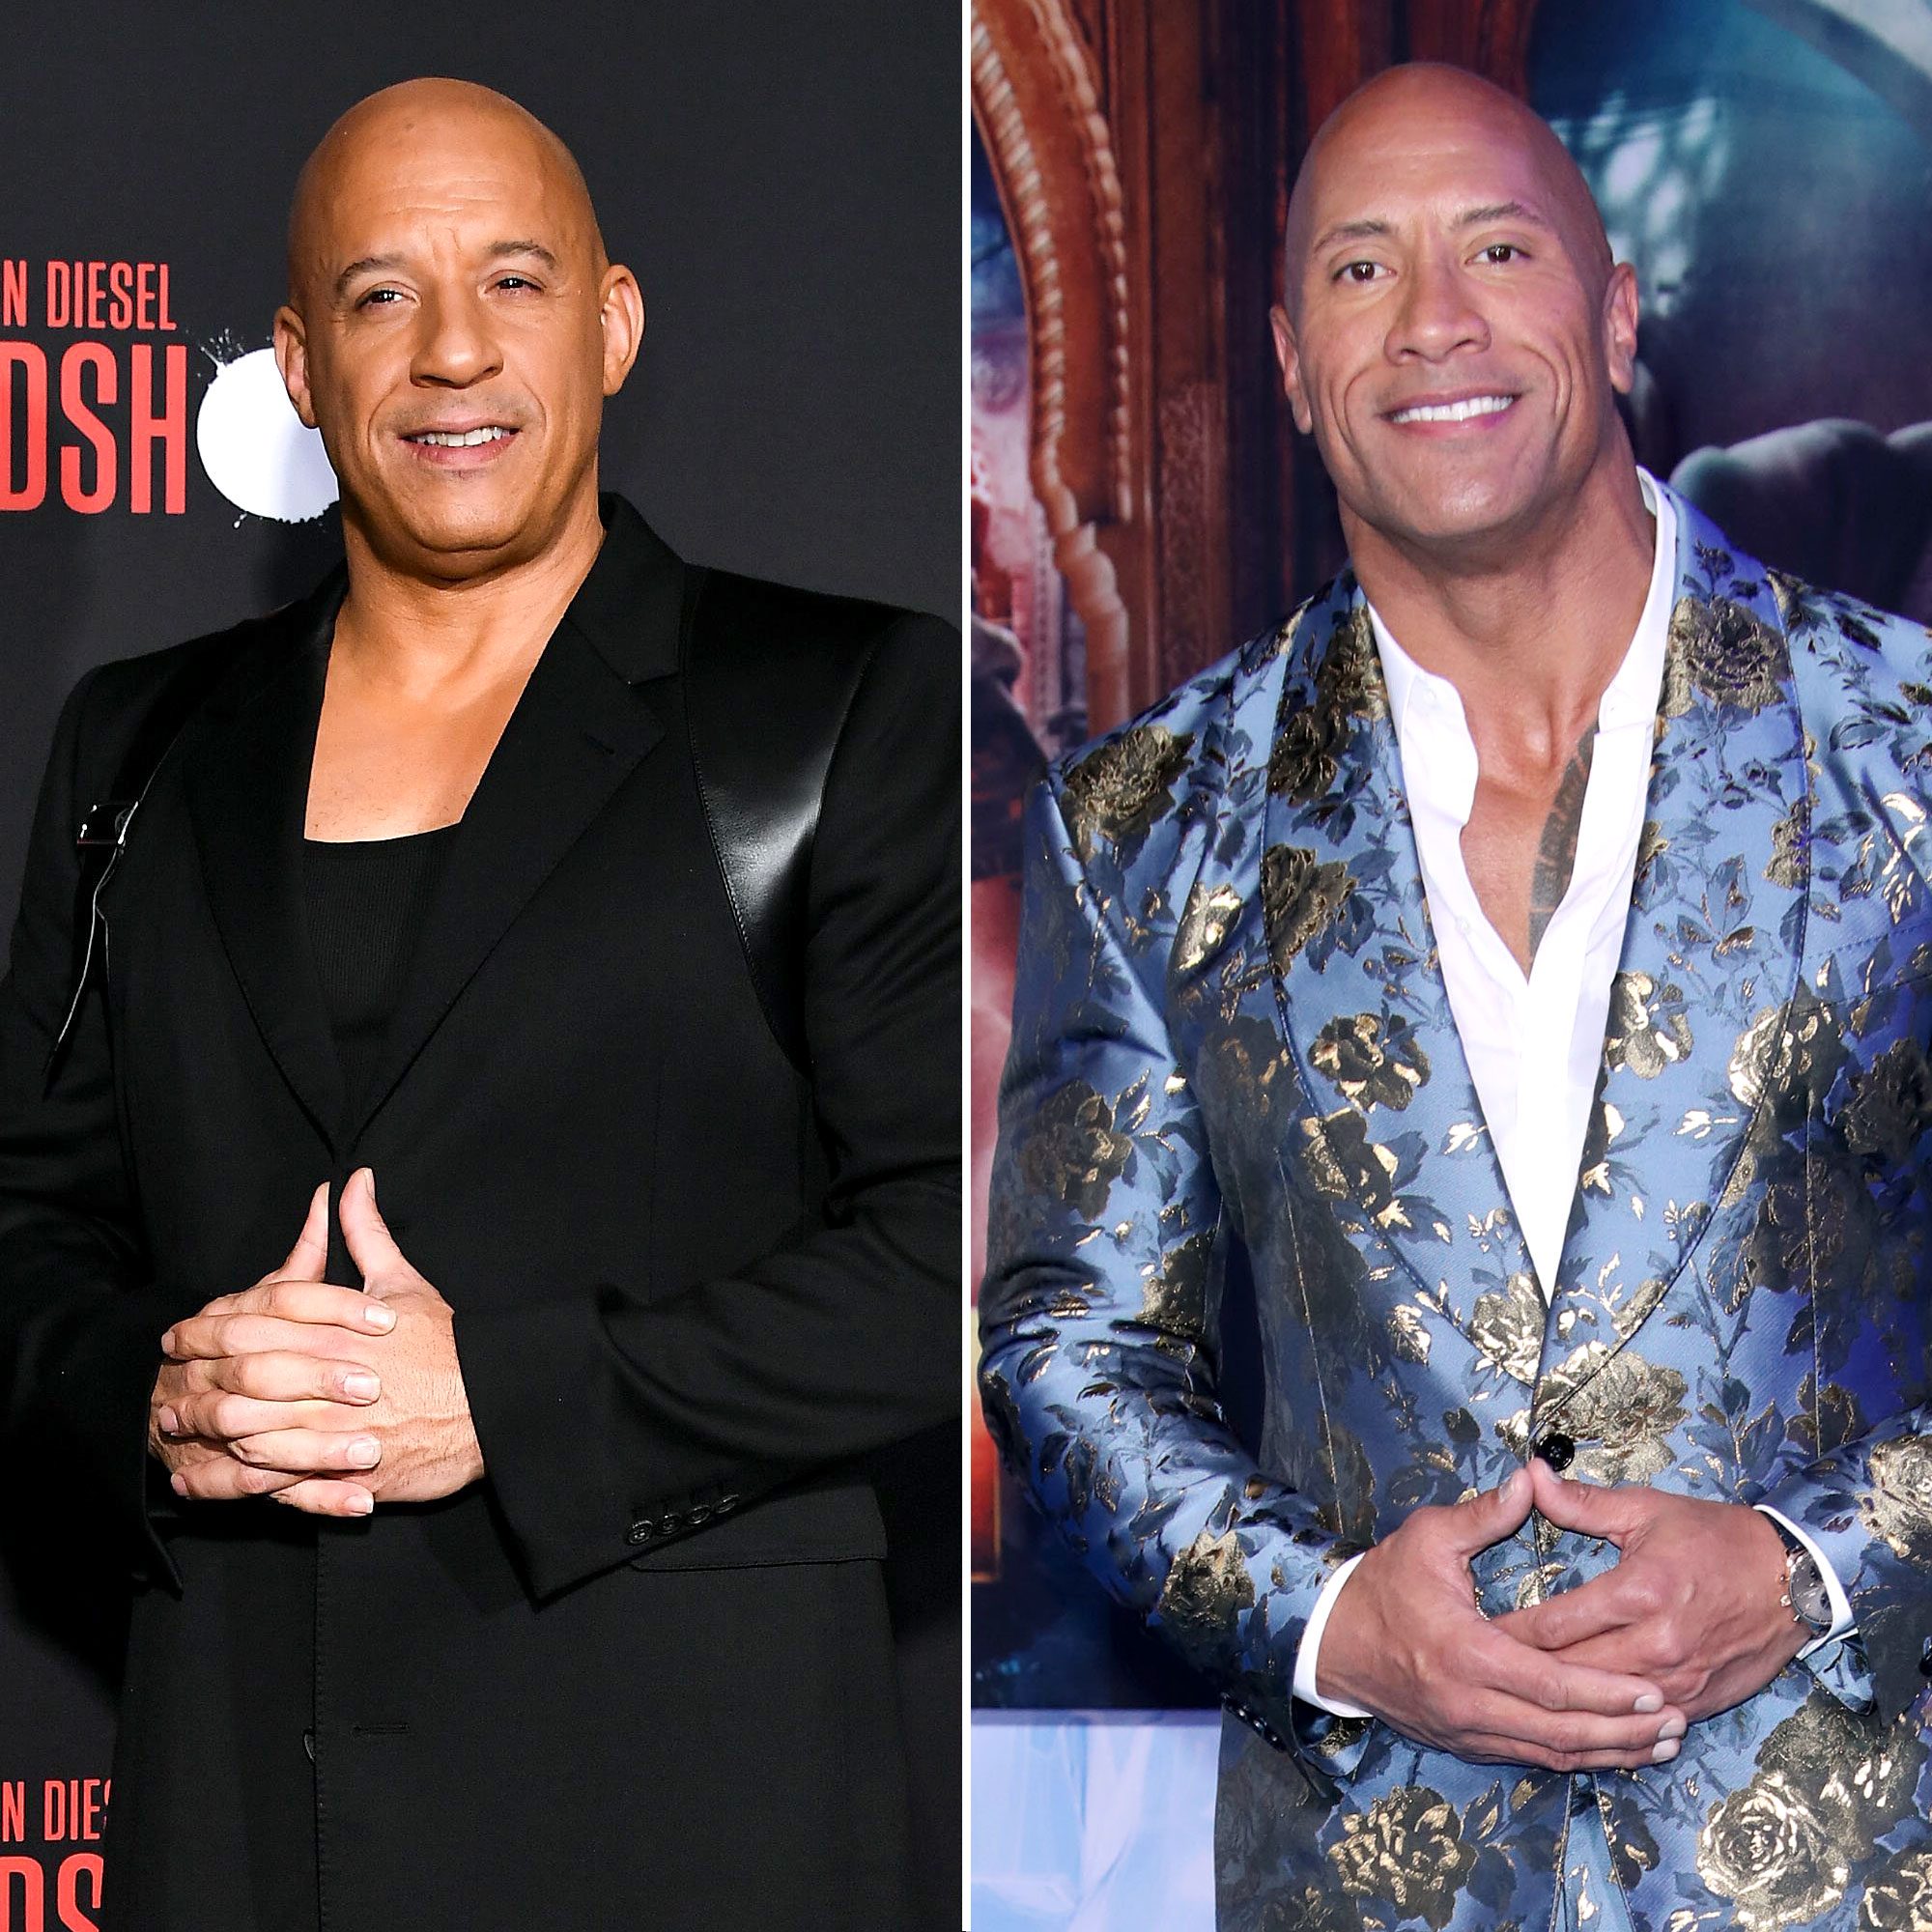 https://www.usmagazine.com/wp-content/uploads/2021/06/Everything-Vin-Diesel-and-Dwayne-The-Rock-Johnson-Have-Said-About-Their-Feud.jpg?quality=55&strip=all